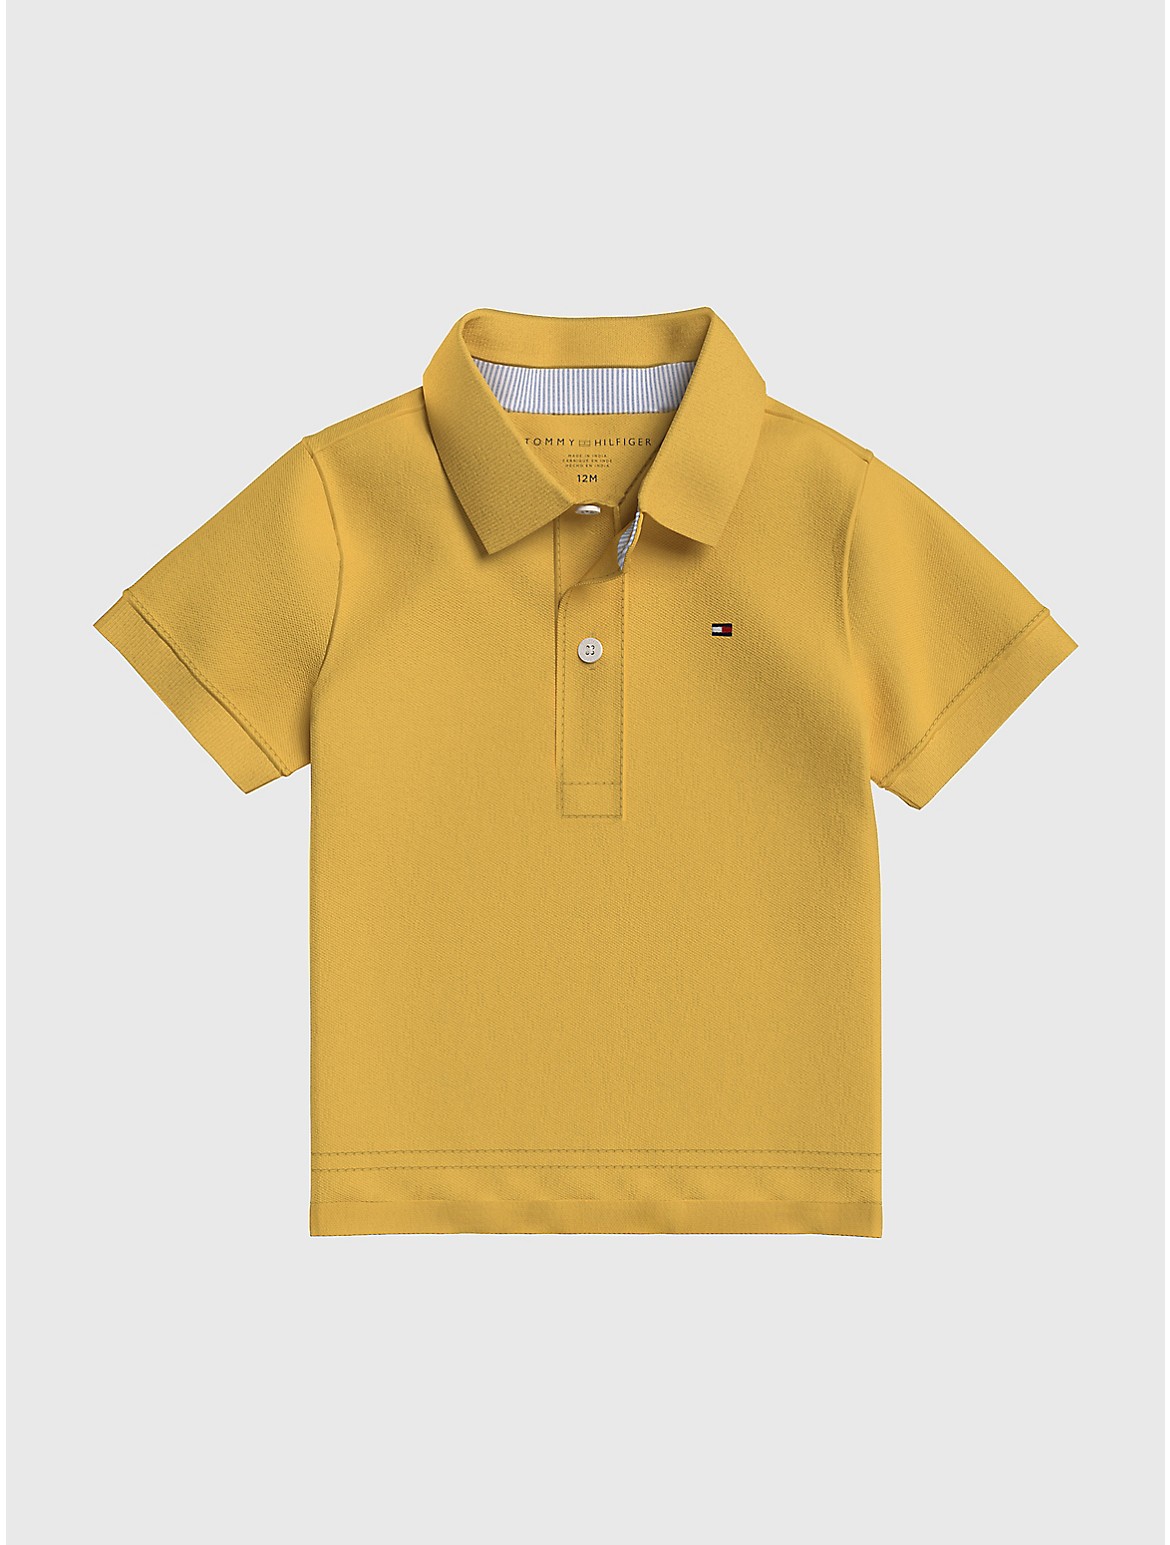 Tommy Hilfiger Boys' Babies' Solid Stretch Polo - Yellow - 12